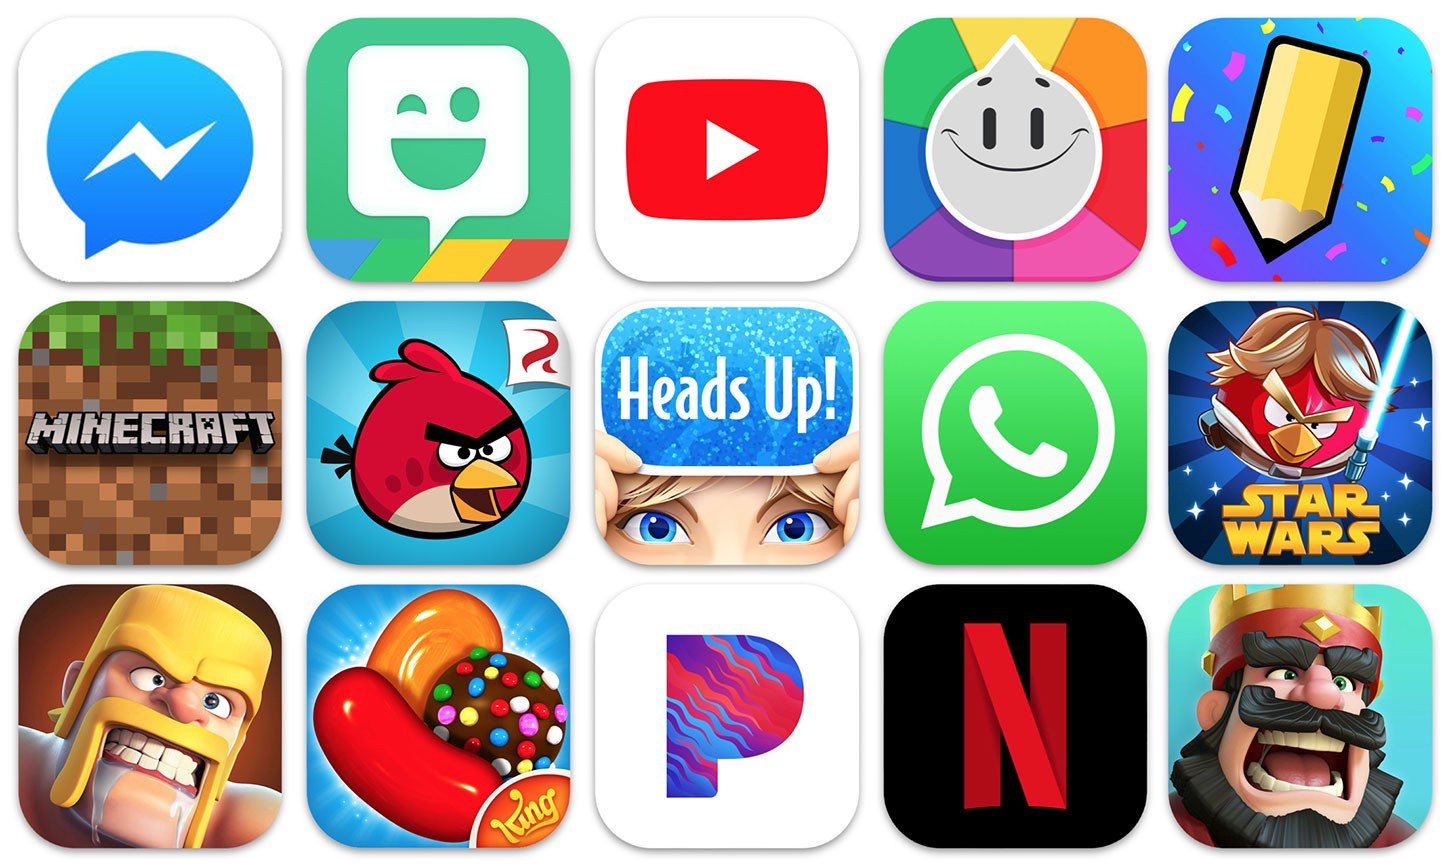 Various app icons representing popular online work apps in Indonesia.